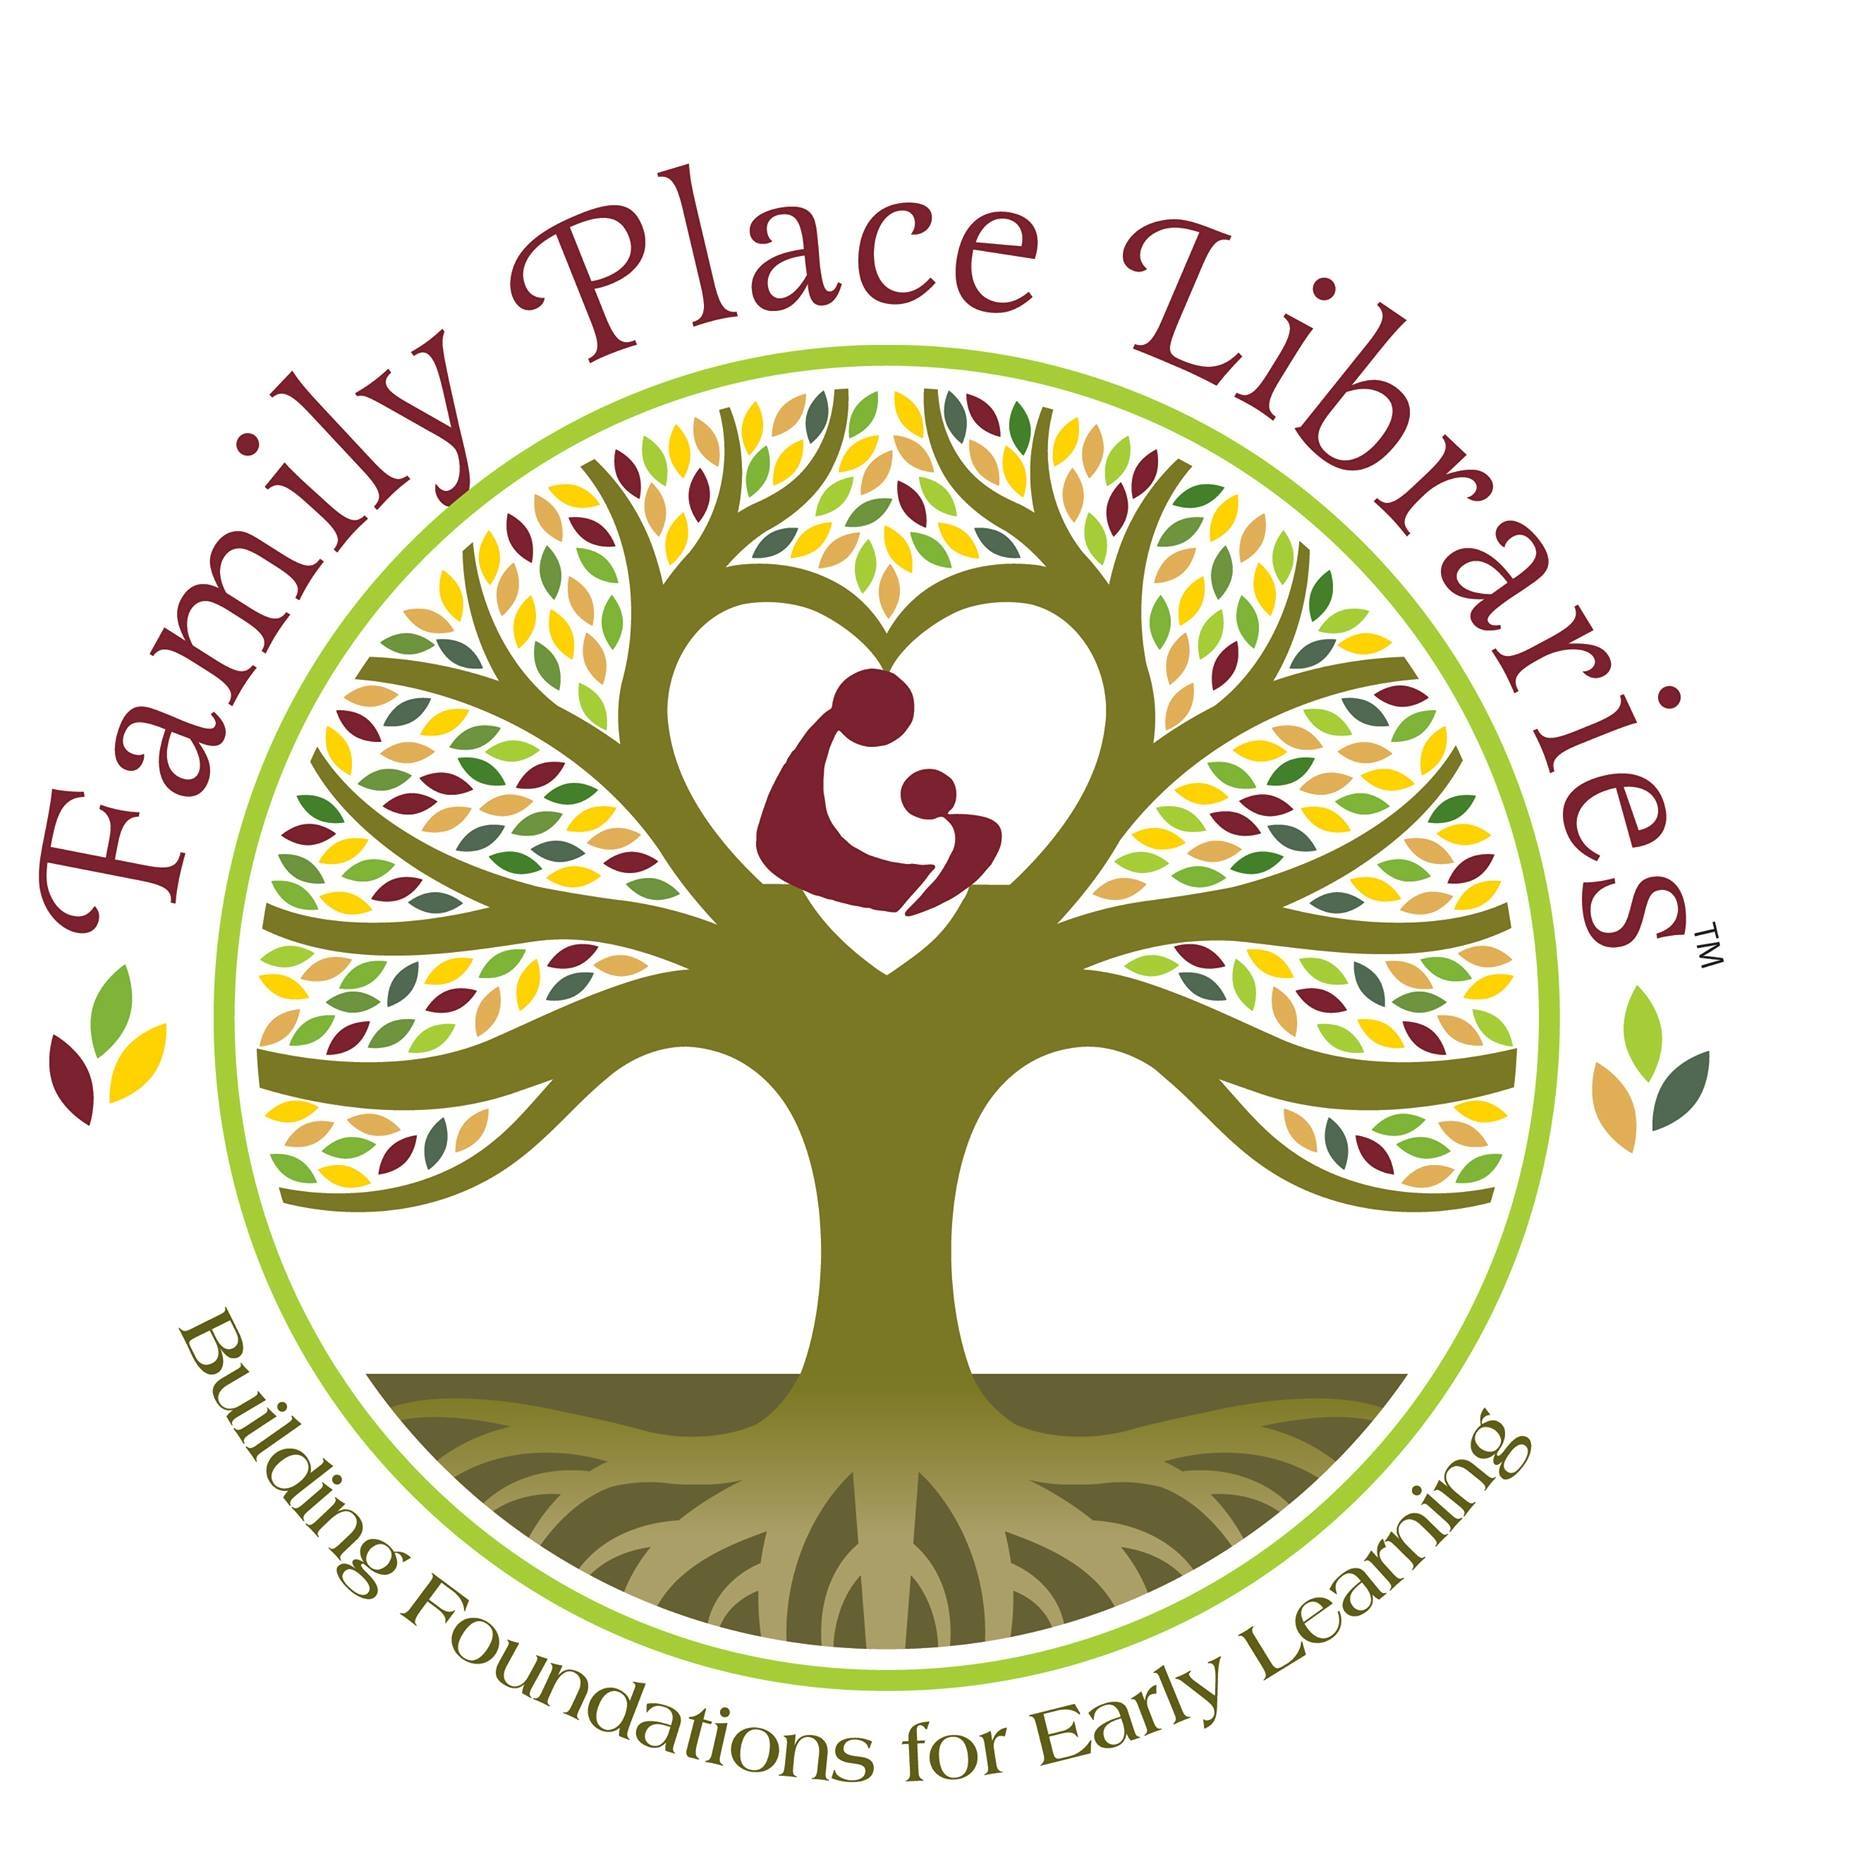 Family Place Libraries logo of a green tree with a symbol of a mother and child in a heart in the center.